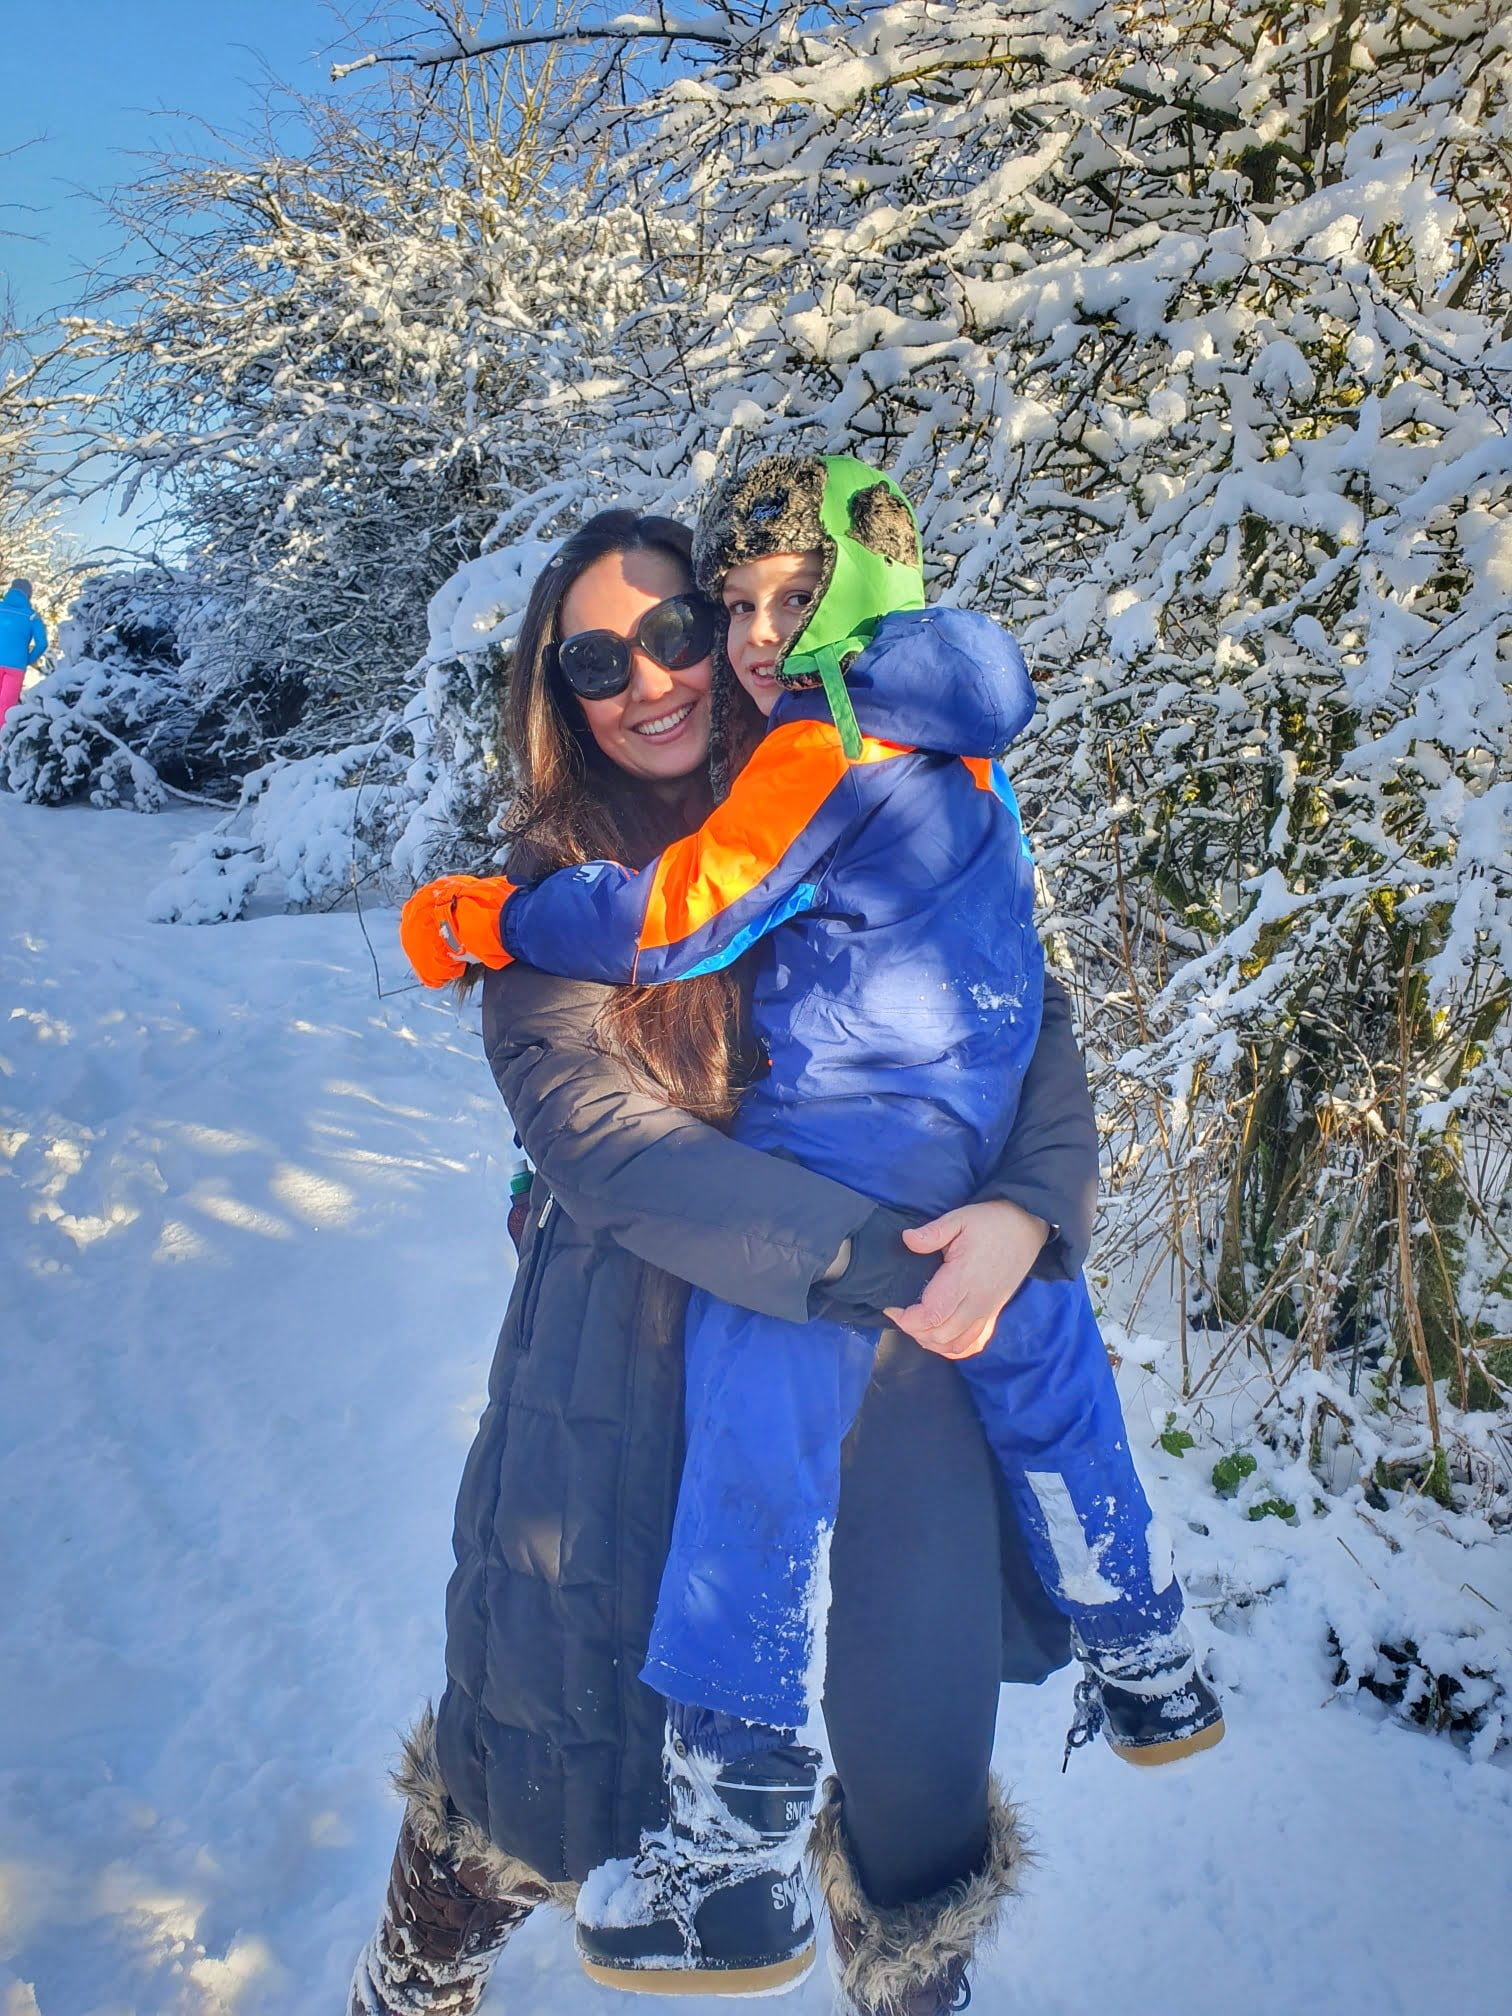 Winter Hiking Essentials: 4 Must-Have Items for a Safe and Enjoyable  Adventure - Mummy Fever